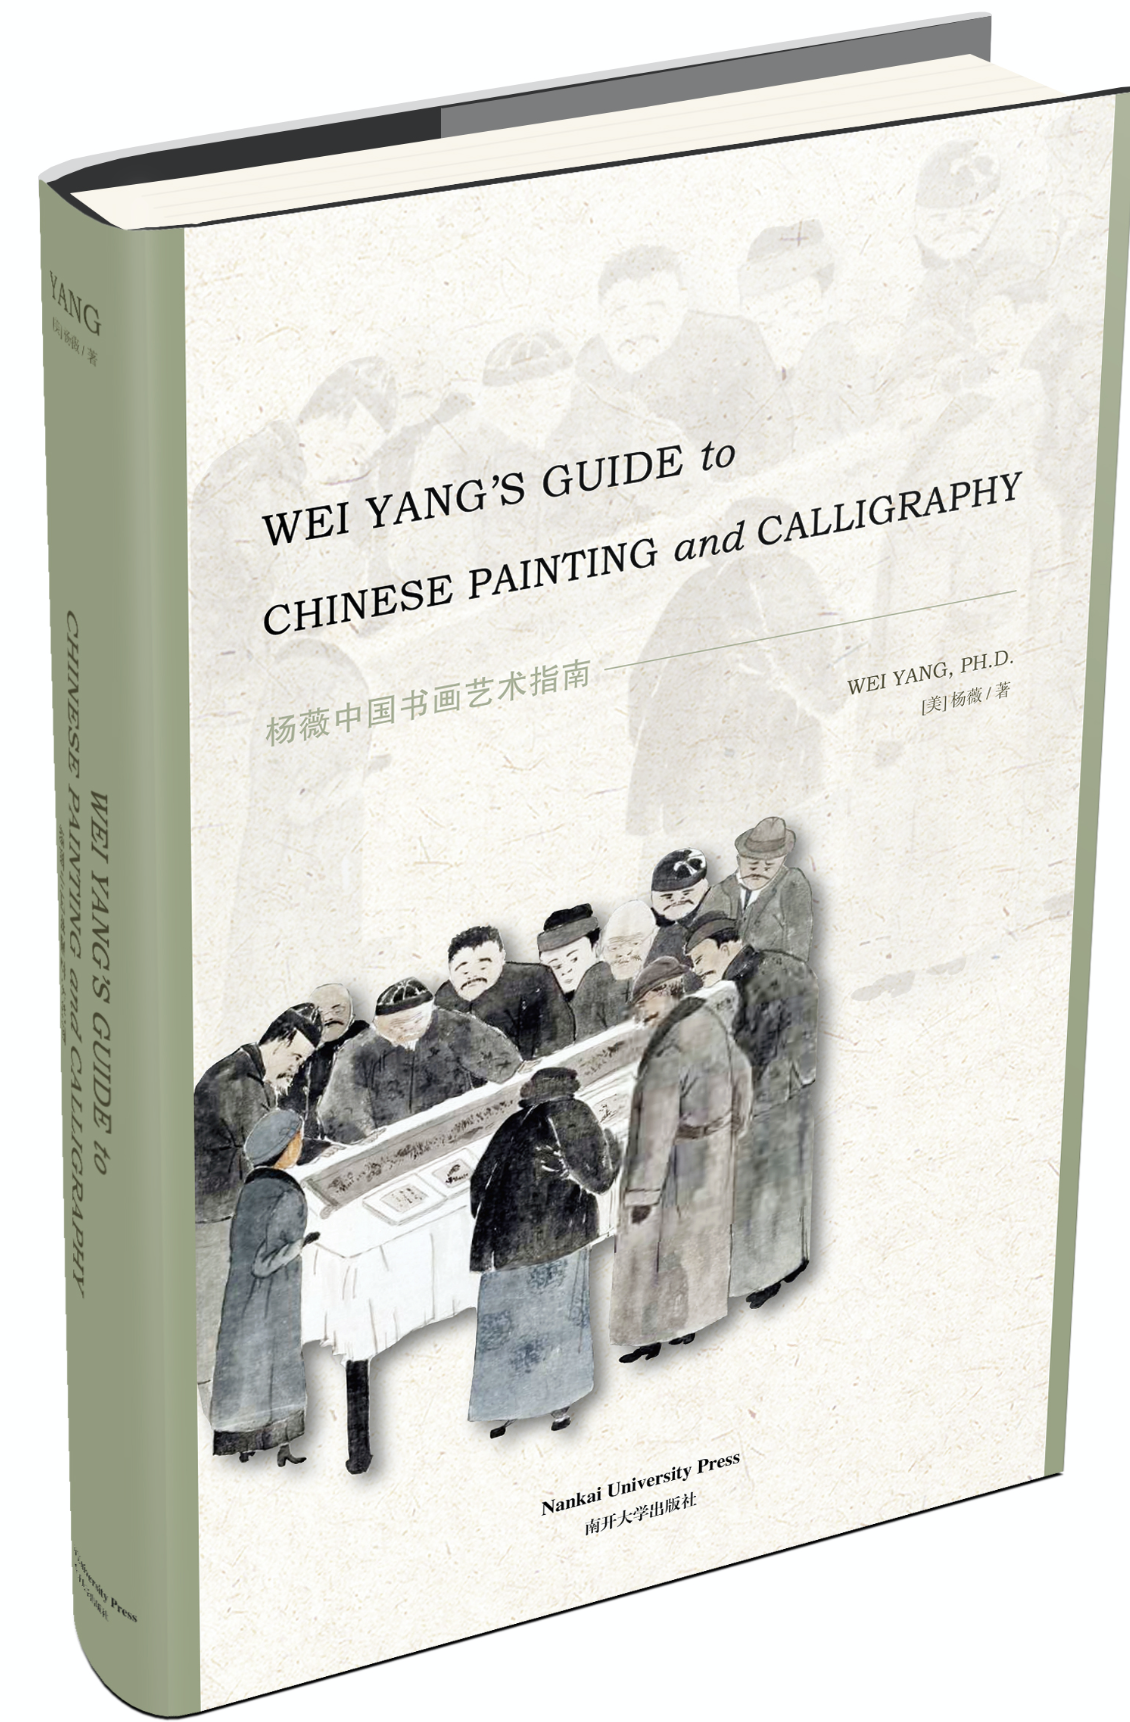 Wei Yang's Guide to Chinese Painting & Calligraphy, 2022